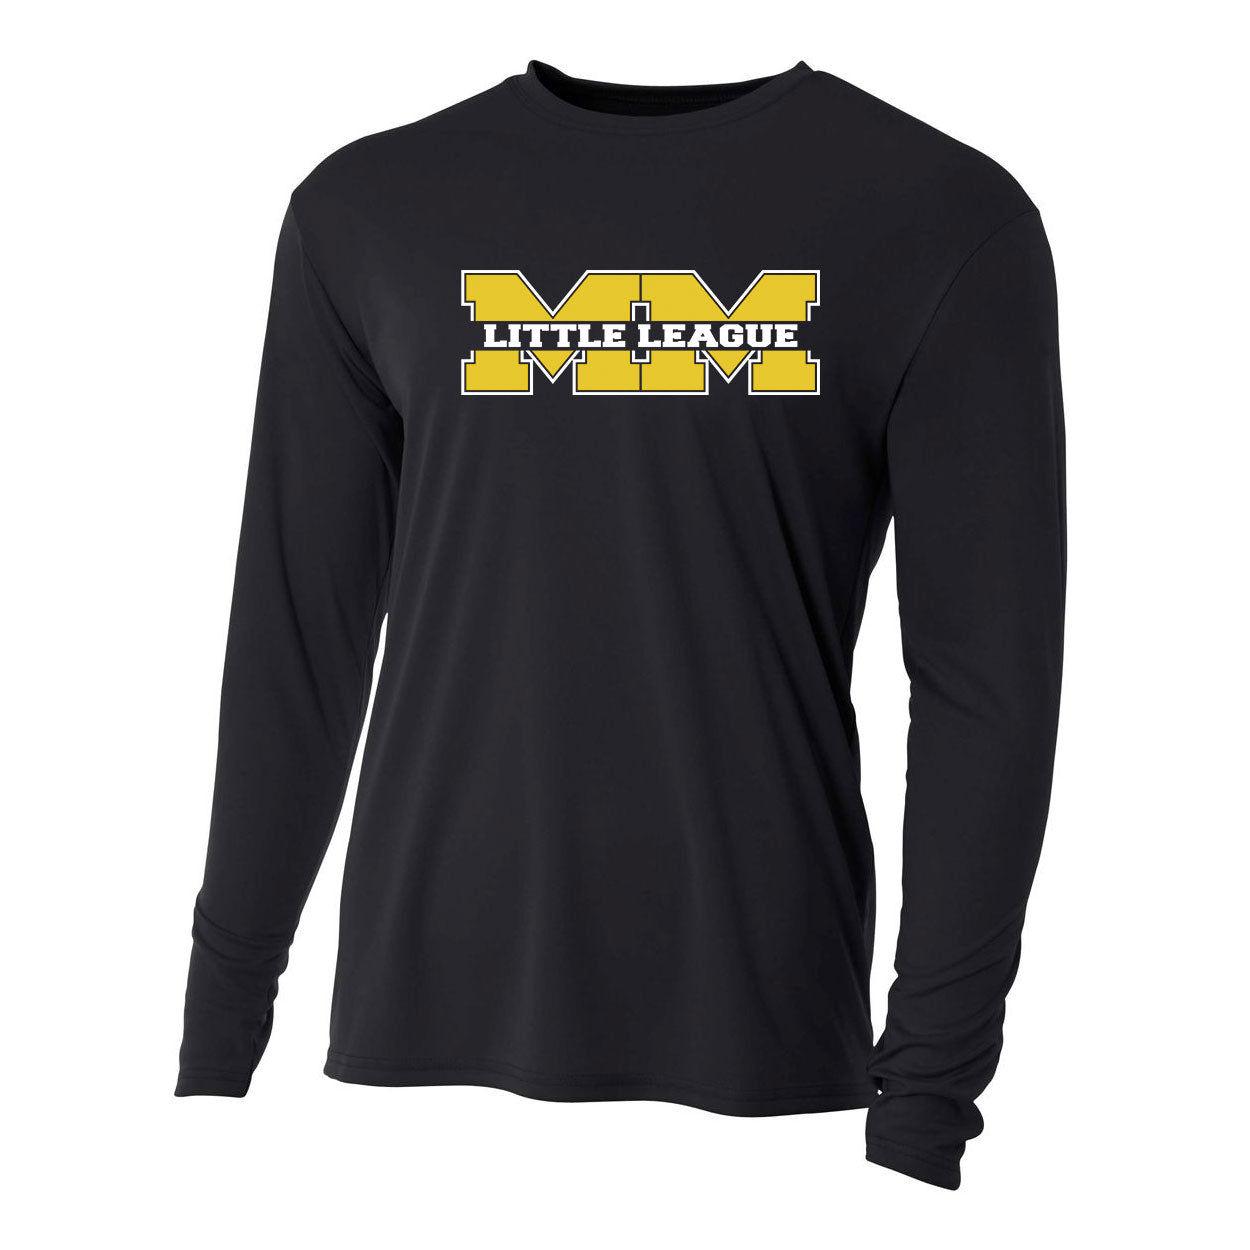 MIRA MESA LITTLE LEAGUE DOUBLE M'S YOUTH COOLING PERFORMANCE LONG SLEEVE CREW